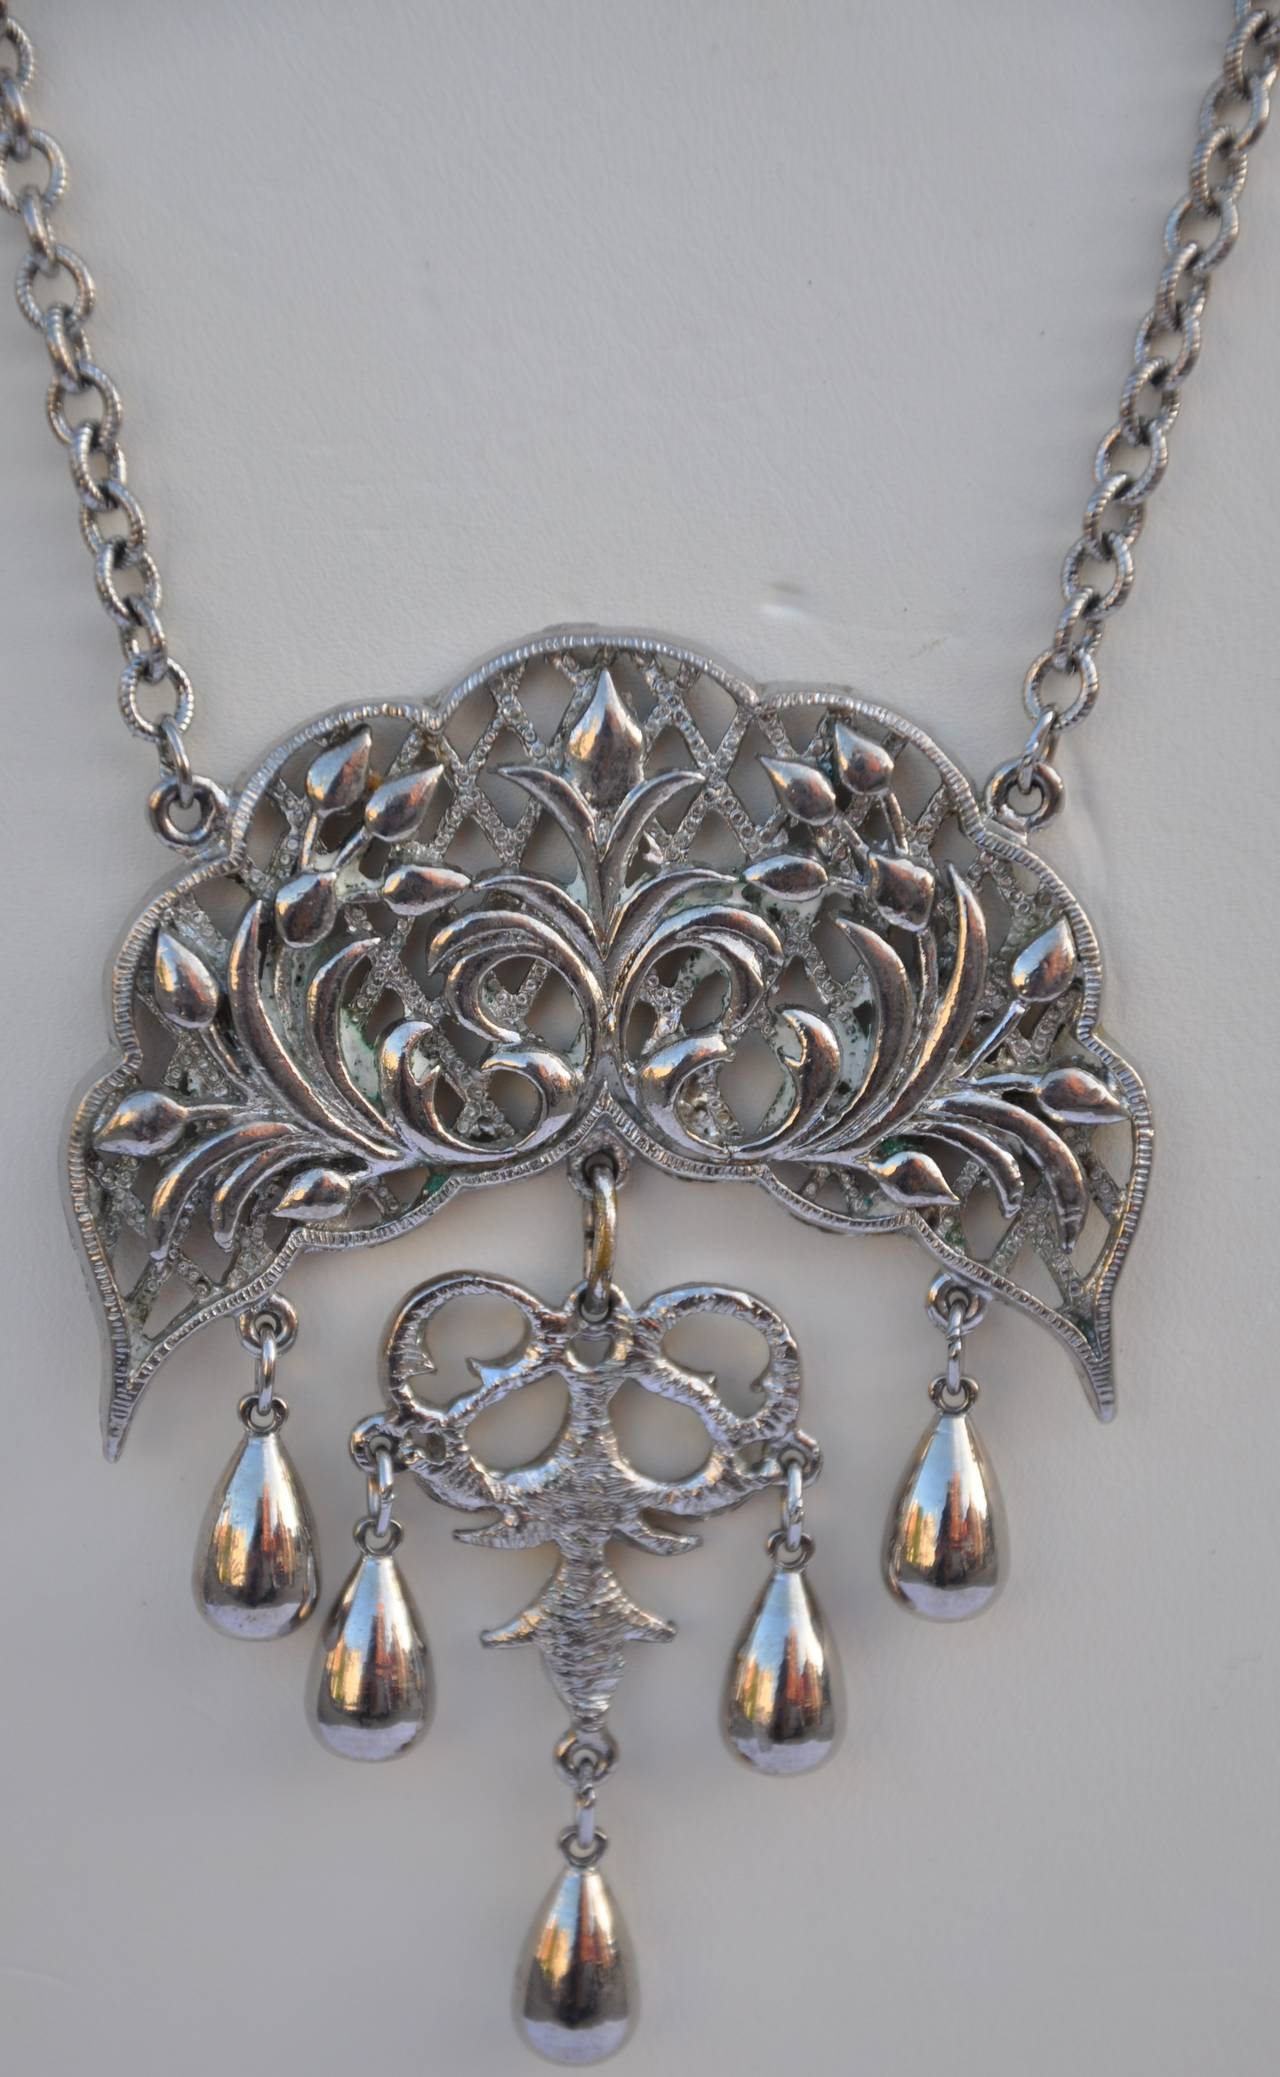 Large gilded silver hardware pendant has movable sections. The pendant measures 3" in height, 2 3/8" in length and 2/8" in depth. The necklace measures 21" in total length, with 3" links at the end to lengthen if desired.